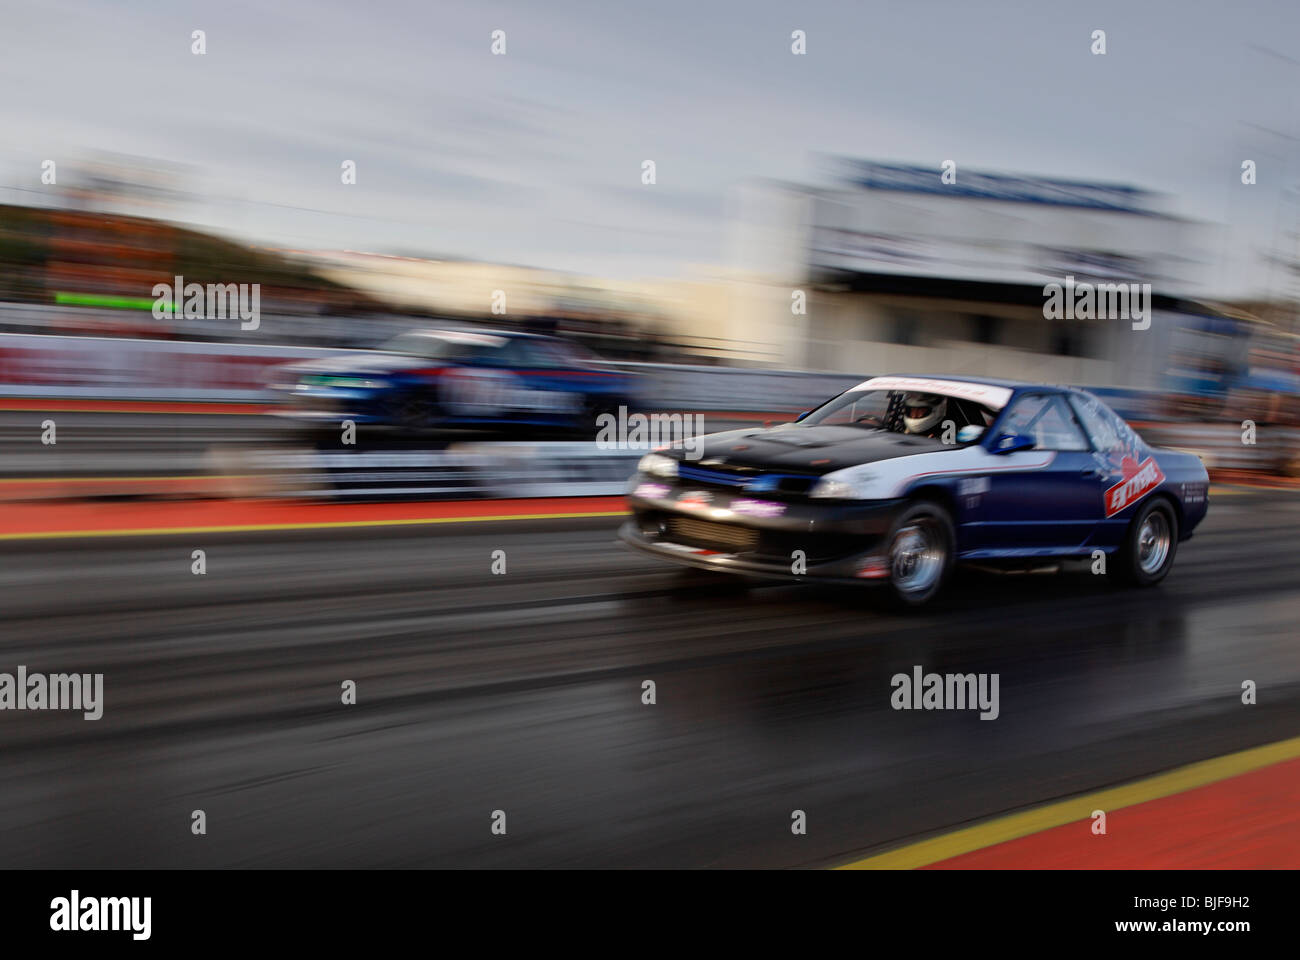 Impressionistic image of Factory Modified HKS series drag racers in action. Stock Photo